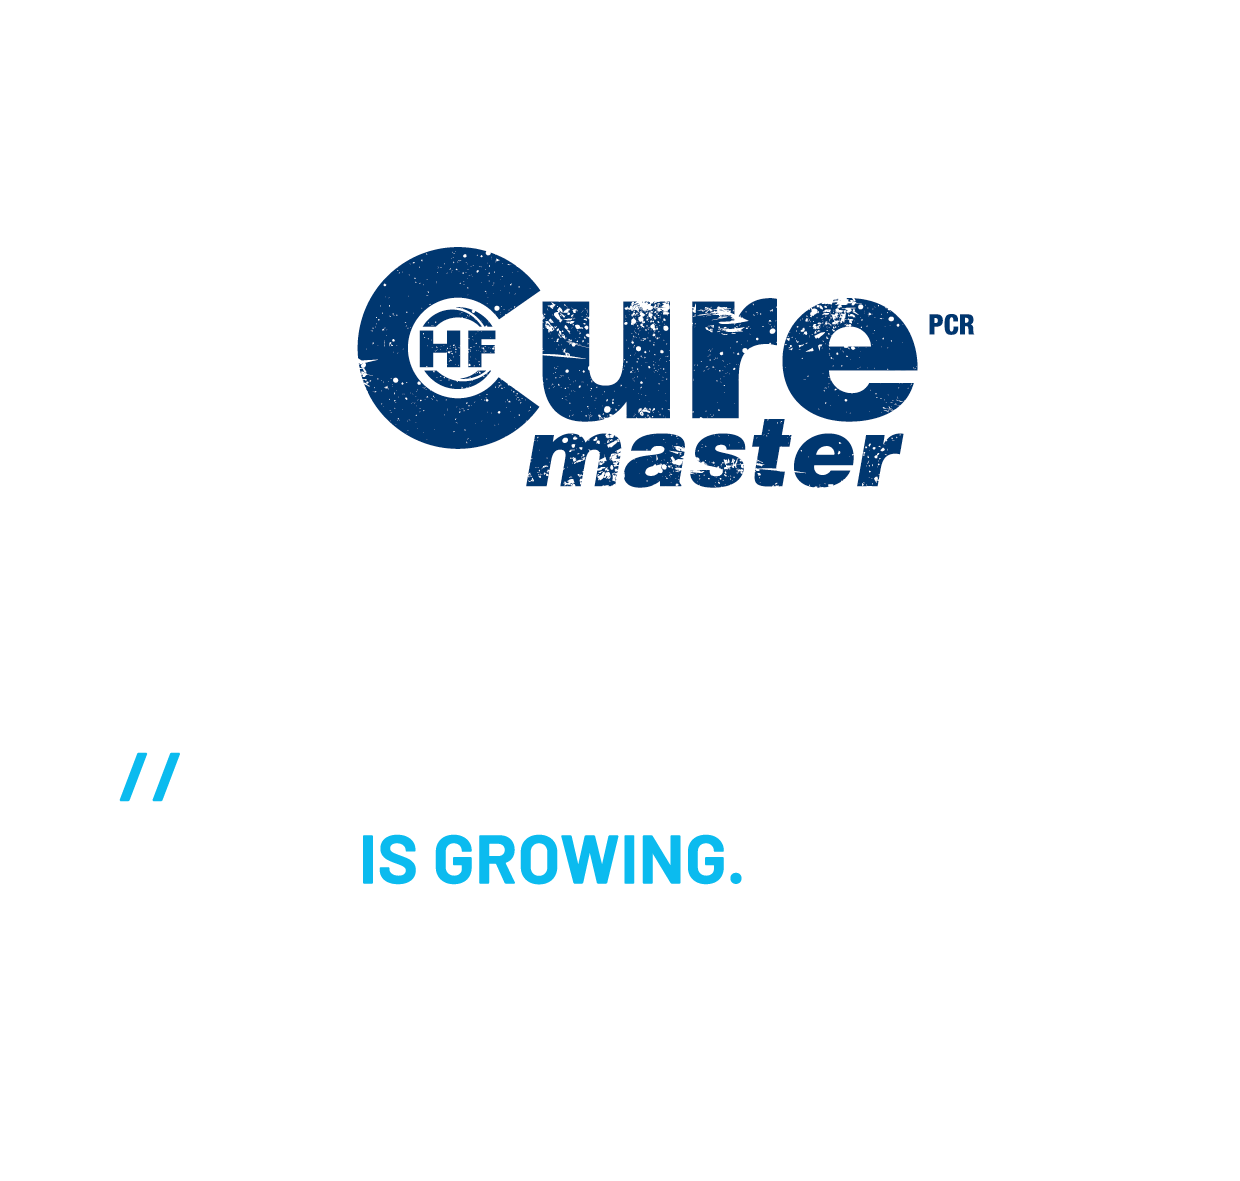 HF Curemaster PCR // Curemaster family is growing.